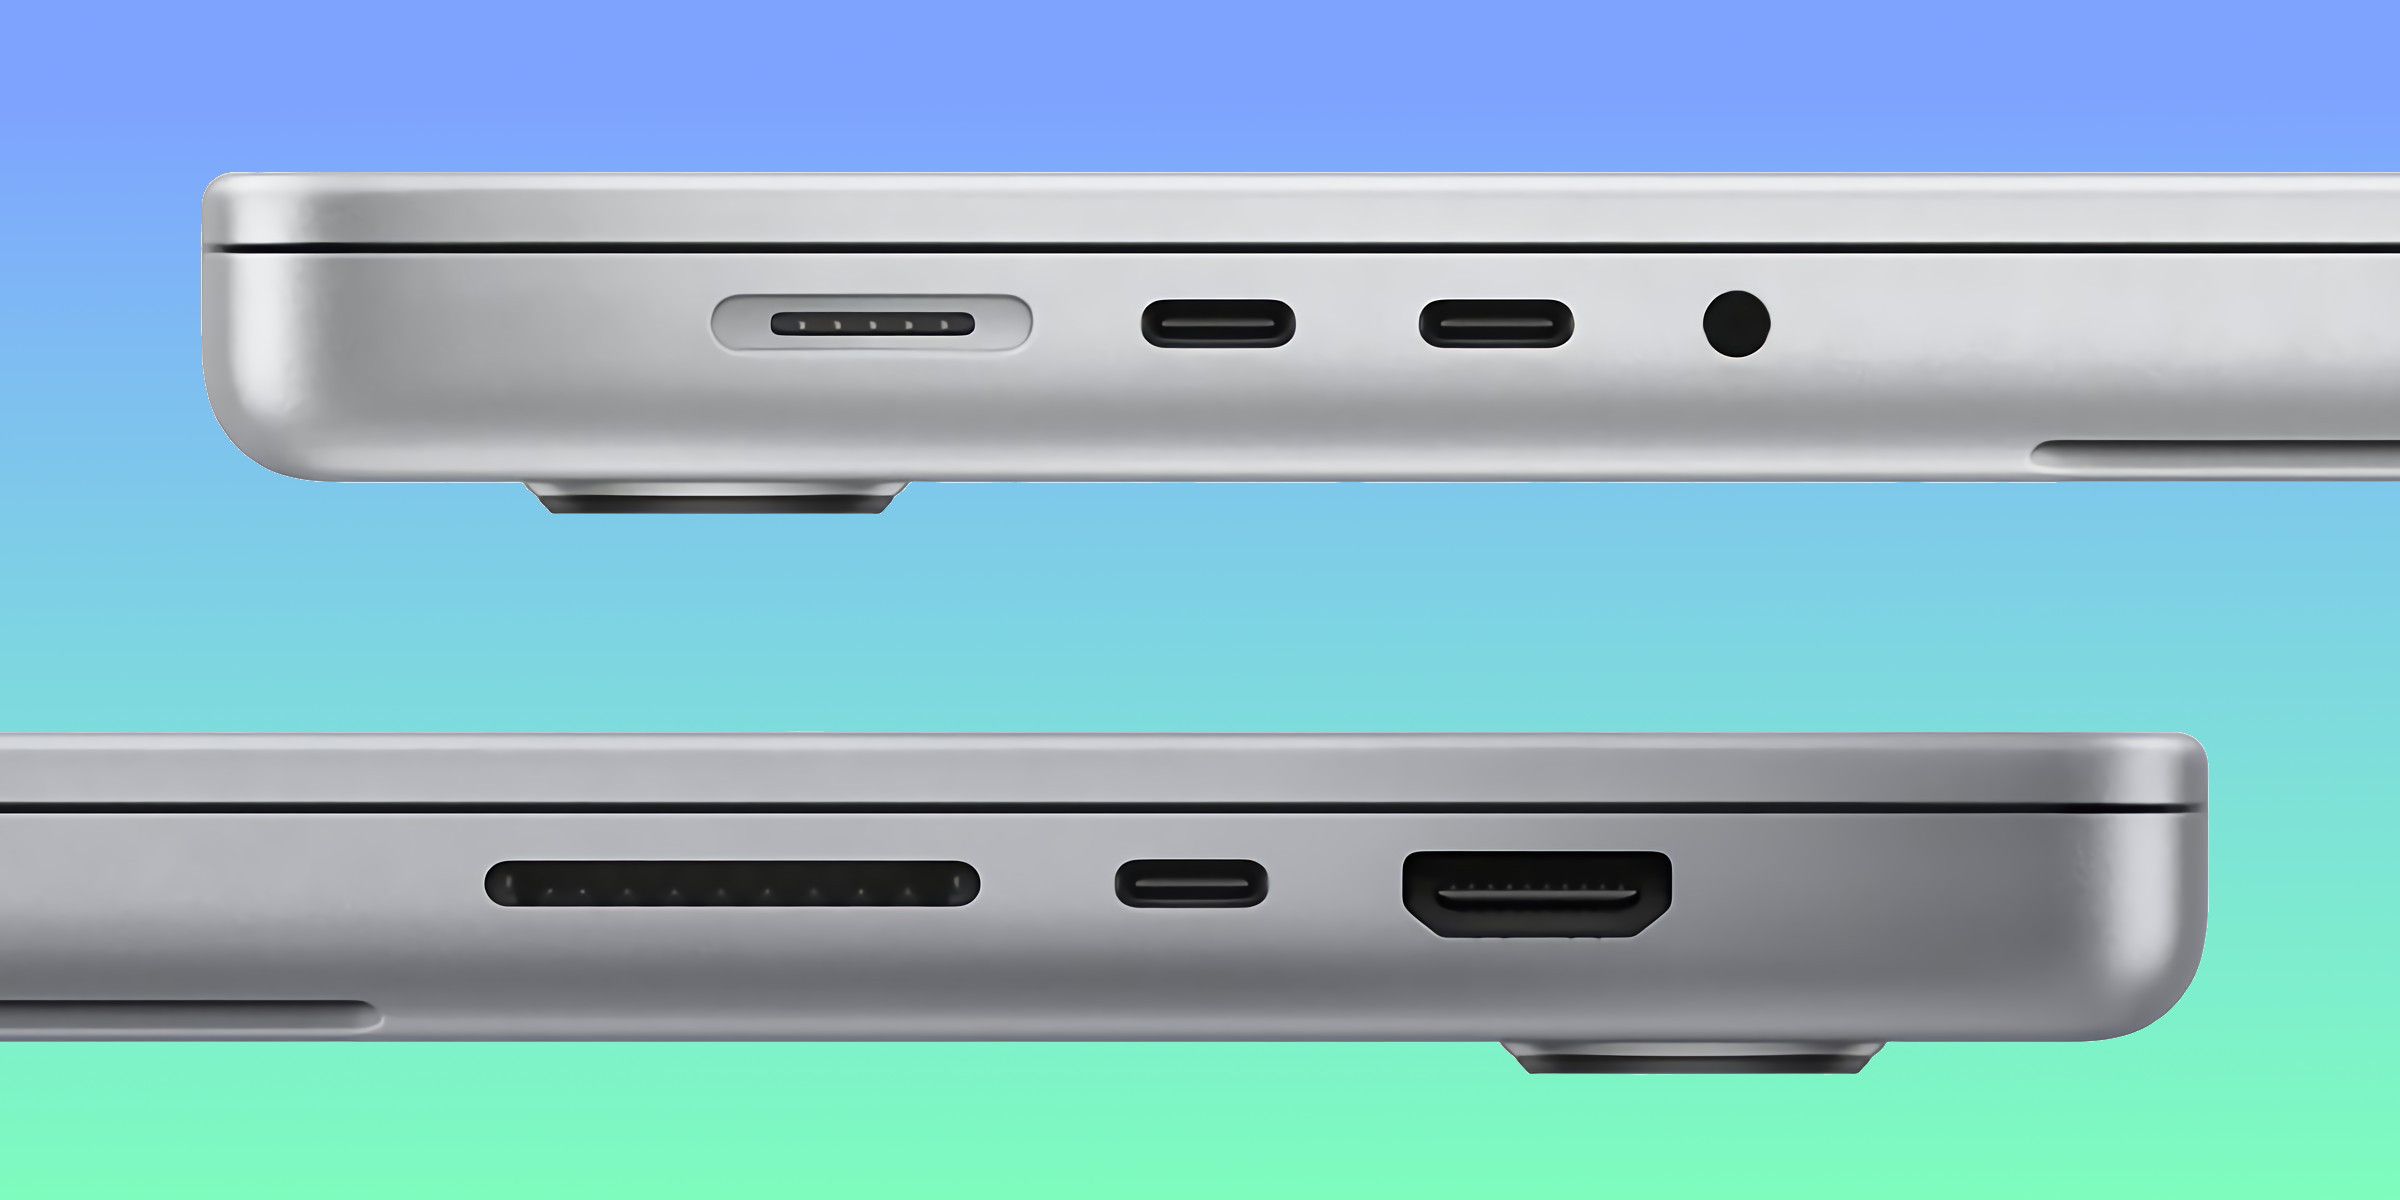 New Details On MacBook Pros Headphone Jack Confirm Its A Huge Upgrade